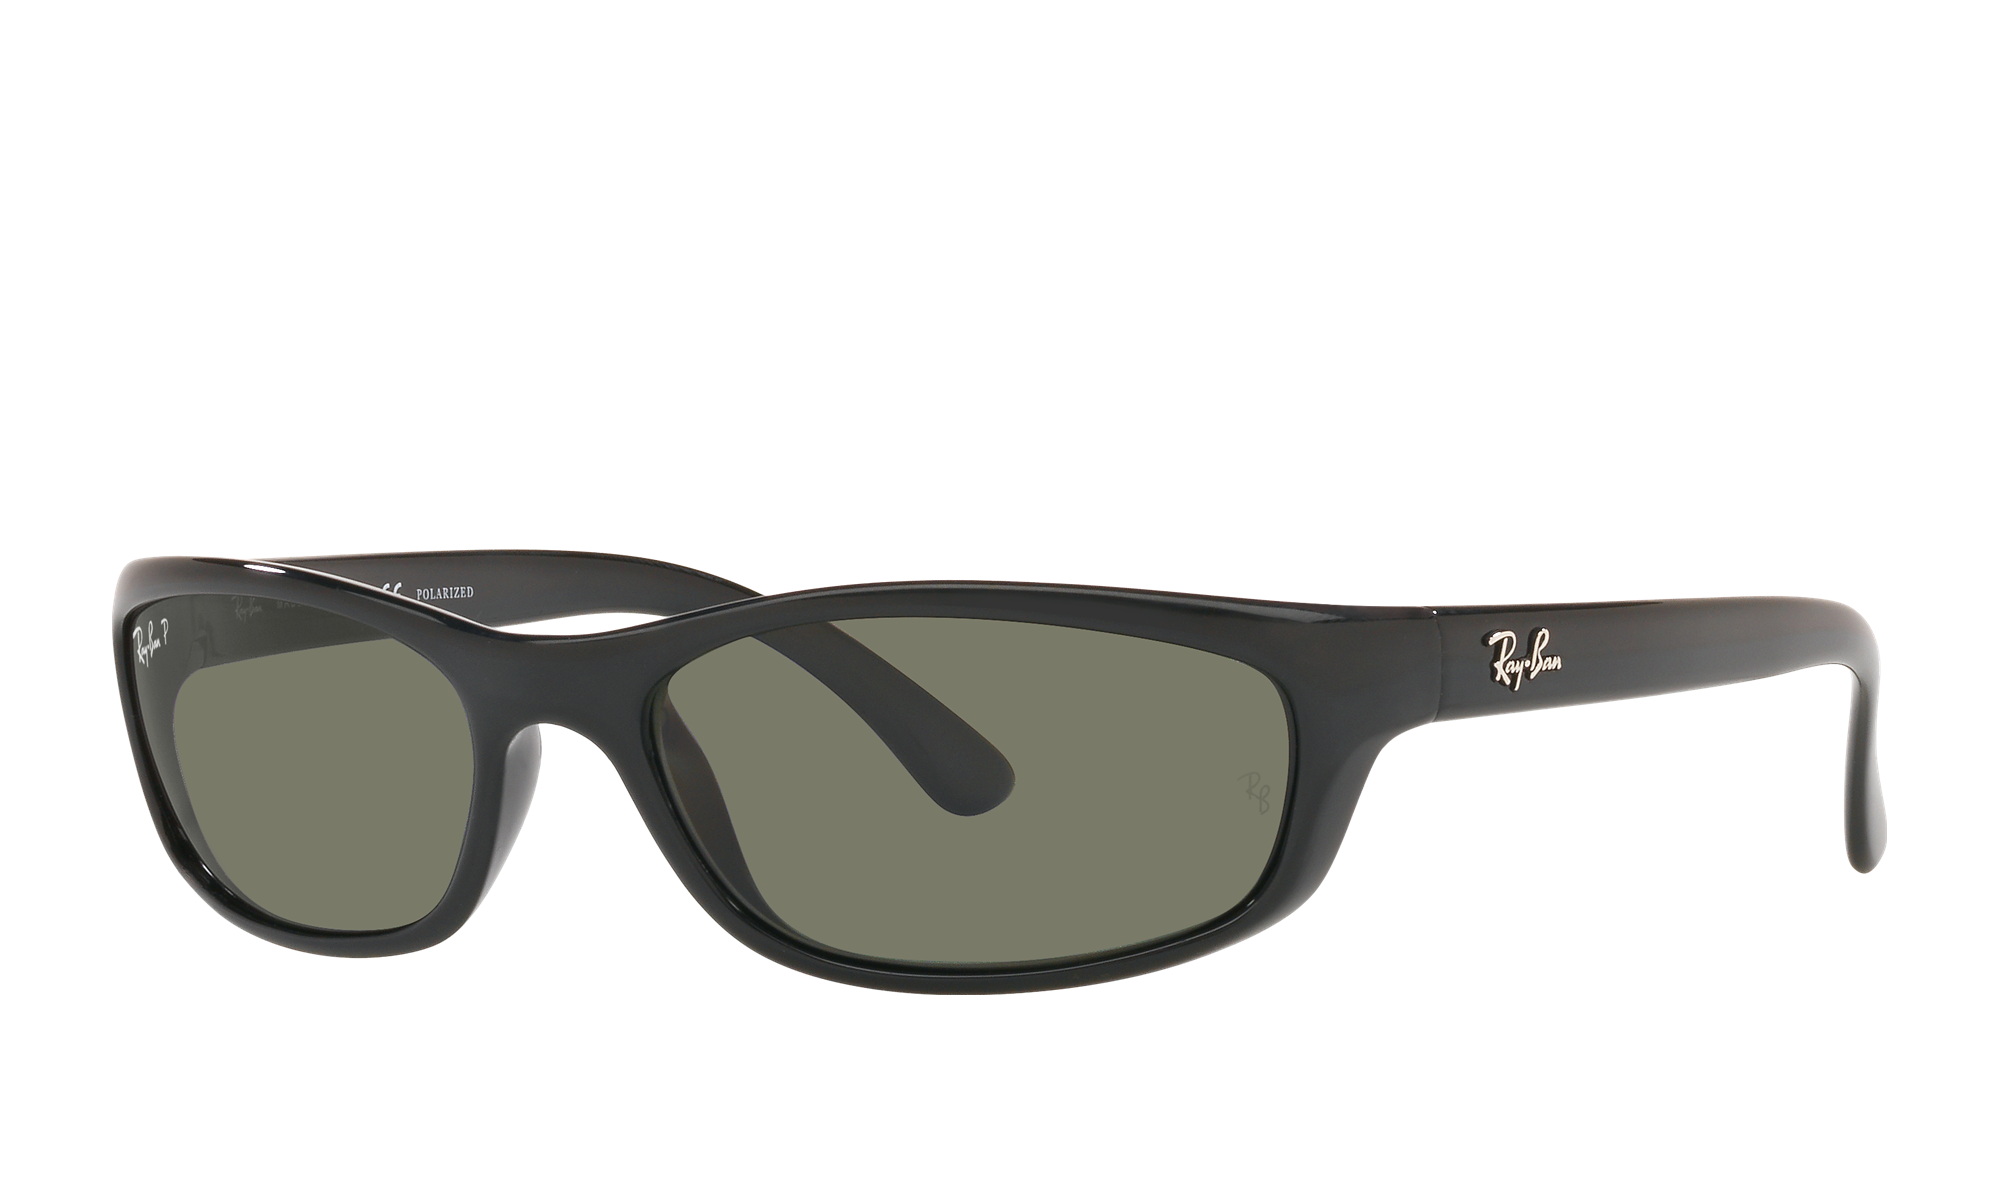 Ray-Ban Unisex Rb4115 Black Size: Small